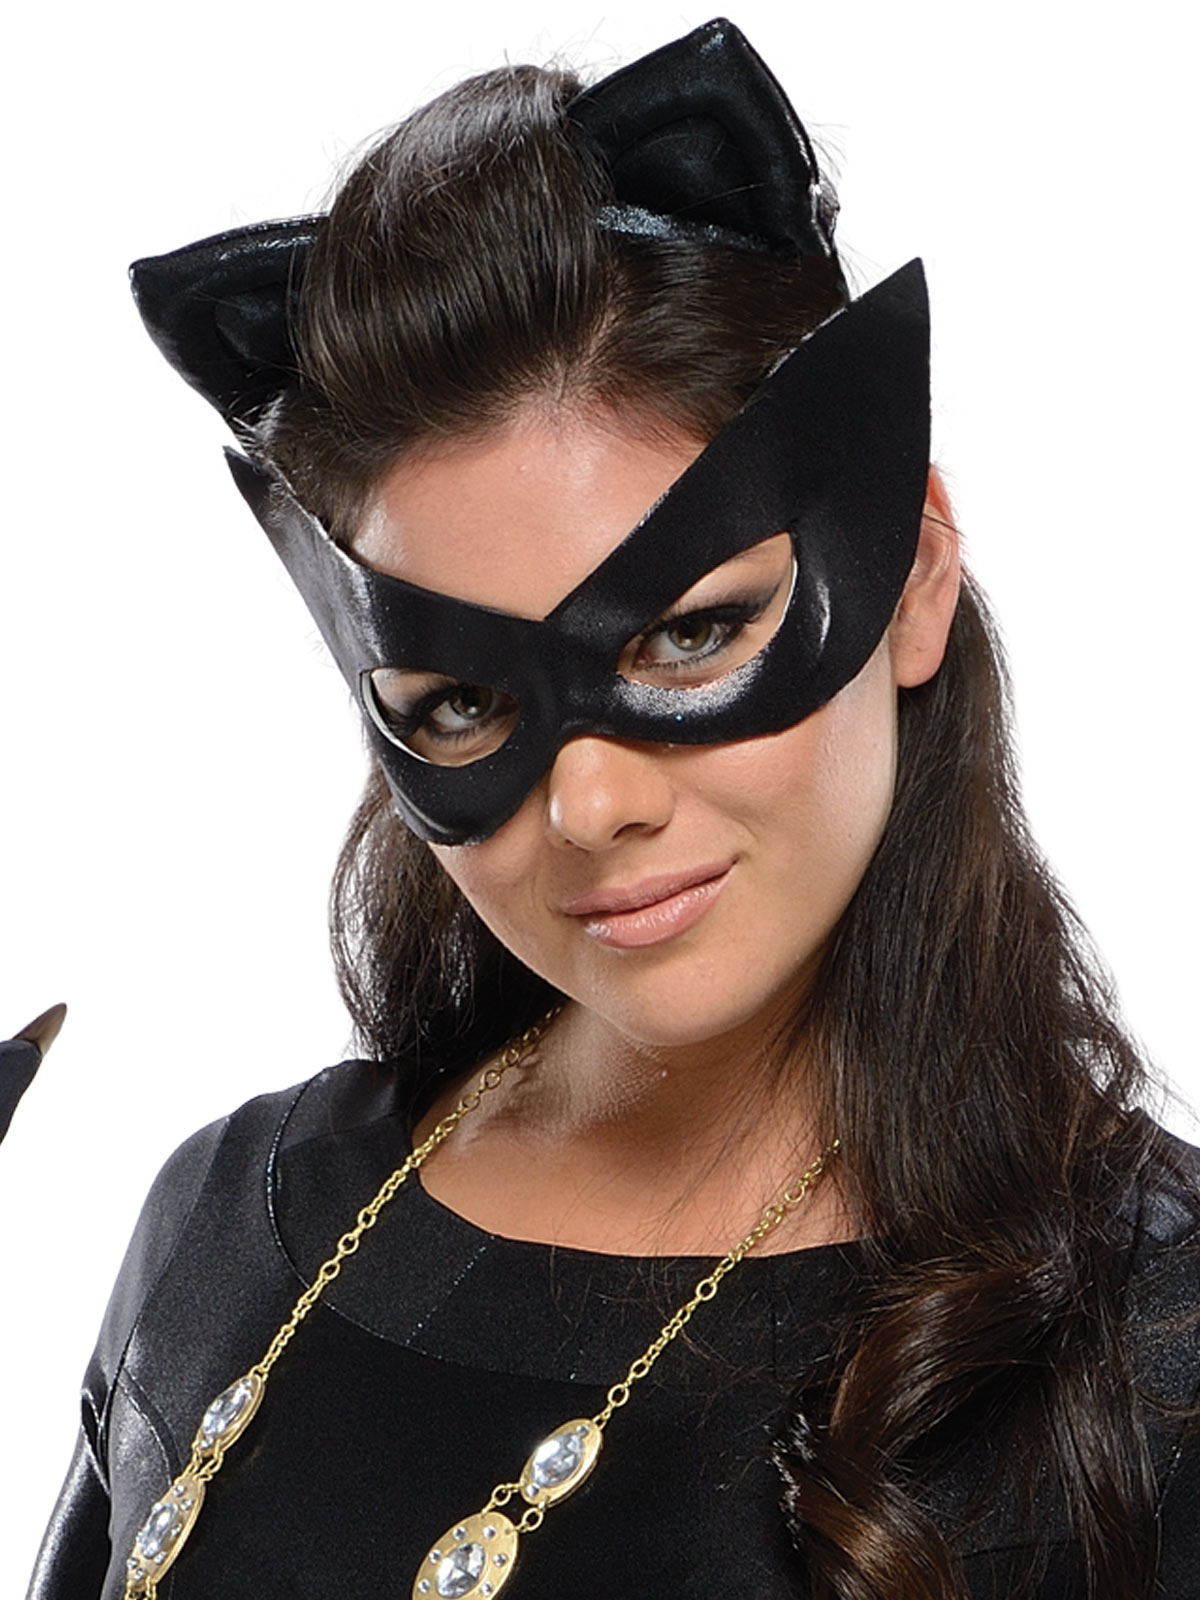 CATWOMAN COLLECTOR'S EDITION COSTUME - Costume Wonderland